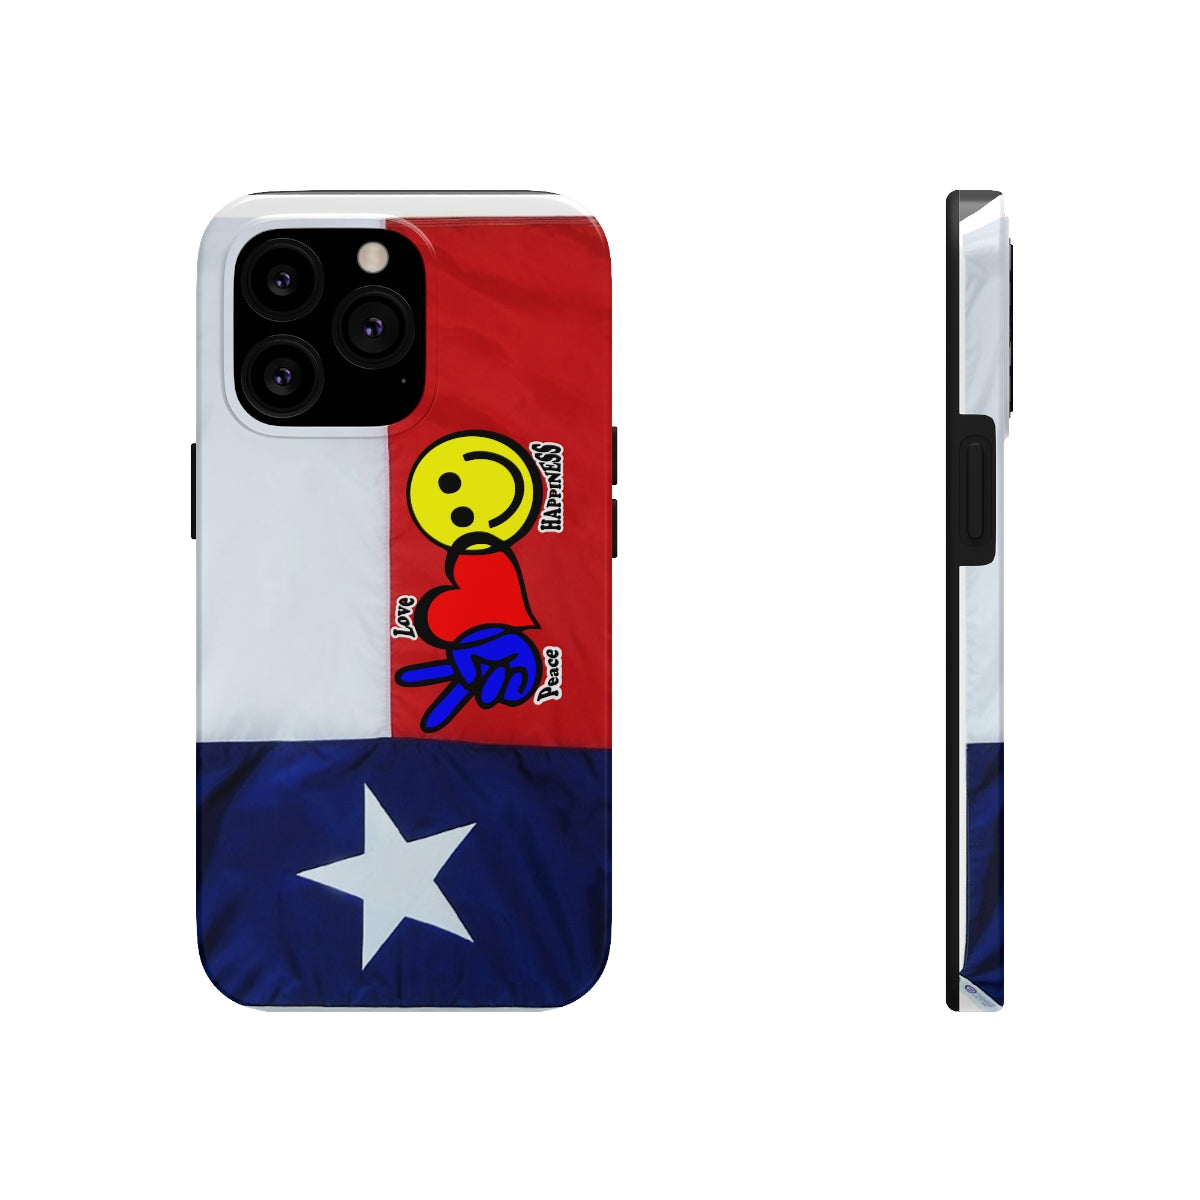 I-Phone Tough Case - Peace, Love & Happiness Texas Style